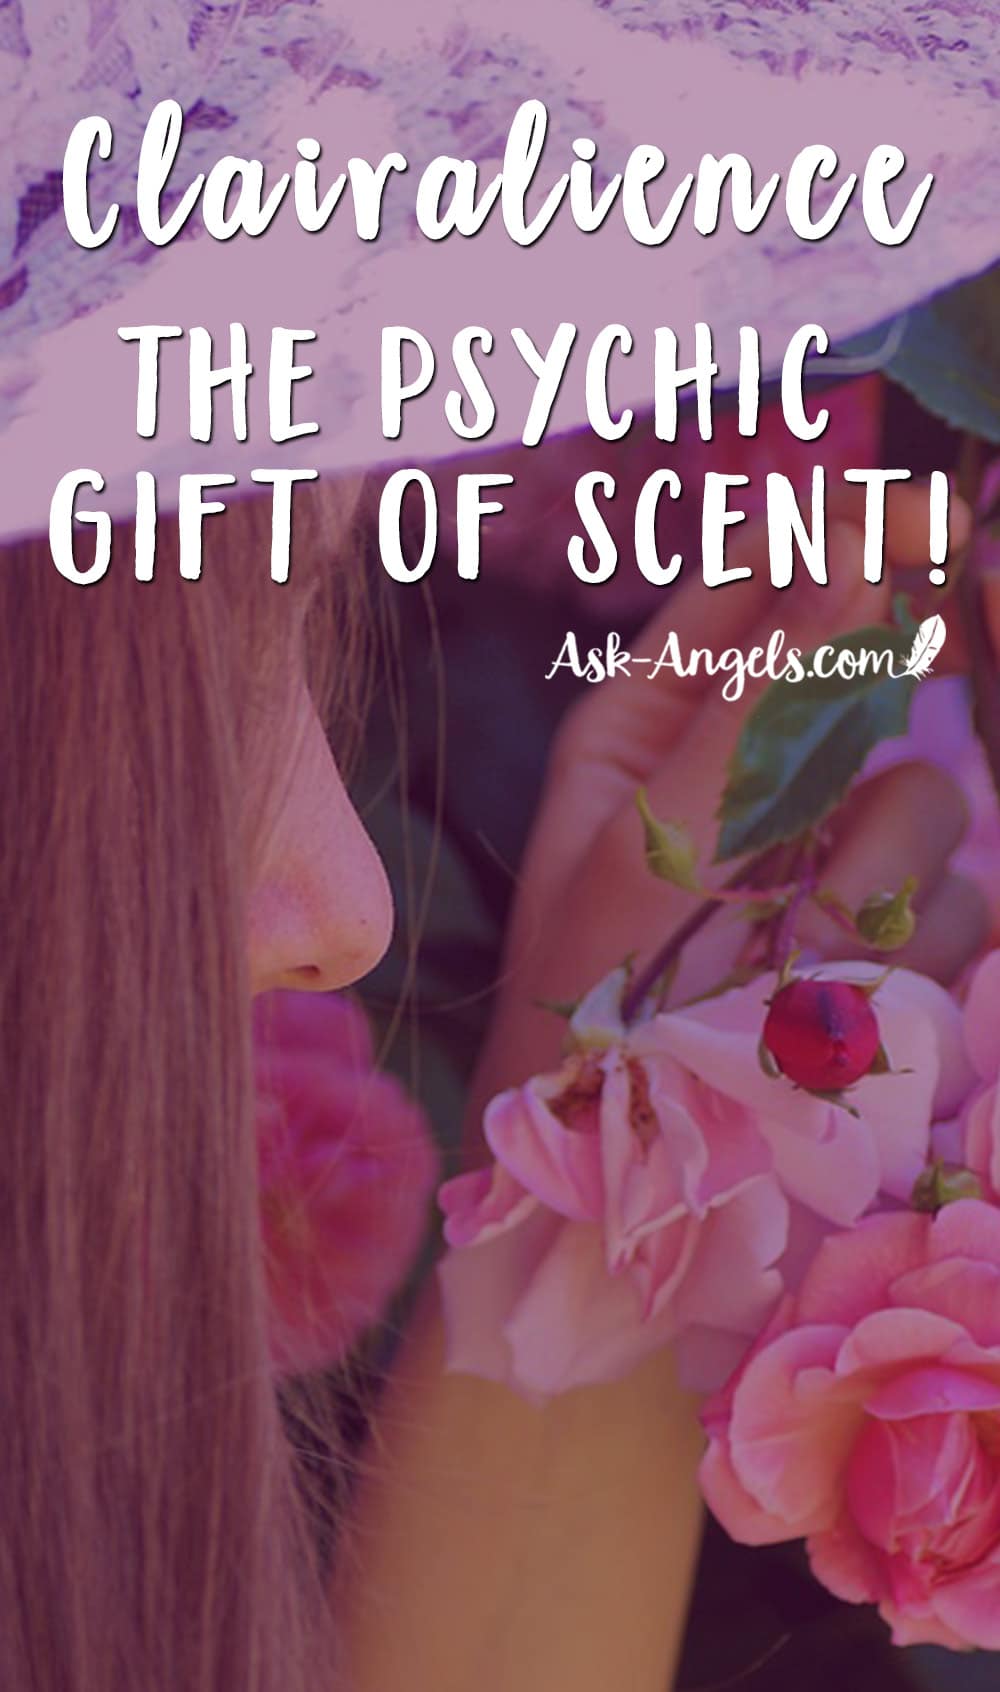 Clairalience - The Psychic Gift of Scent